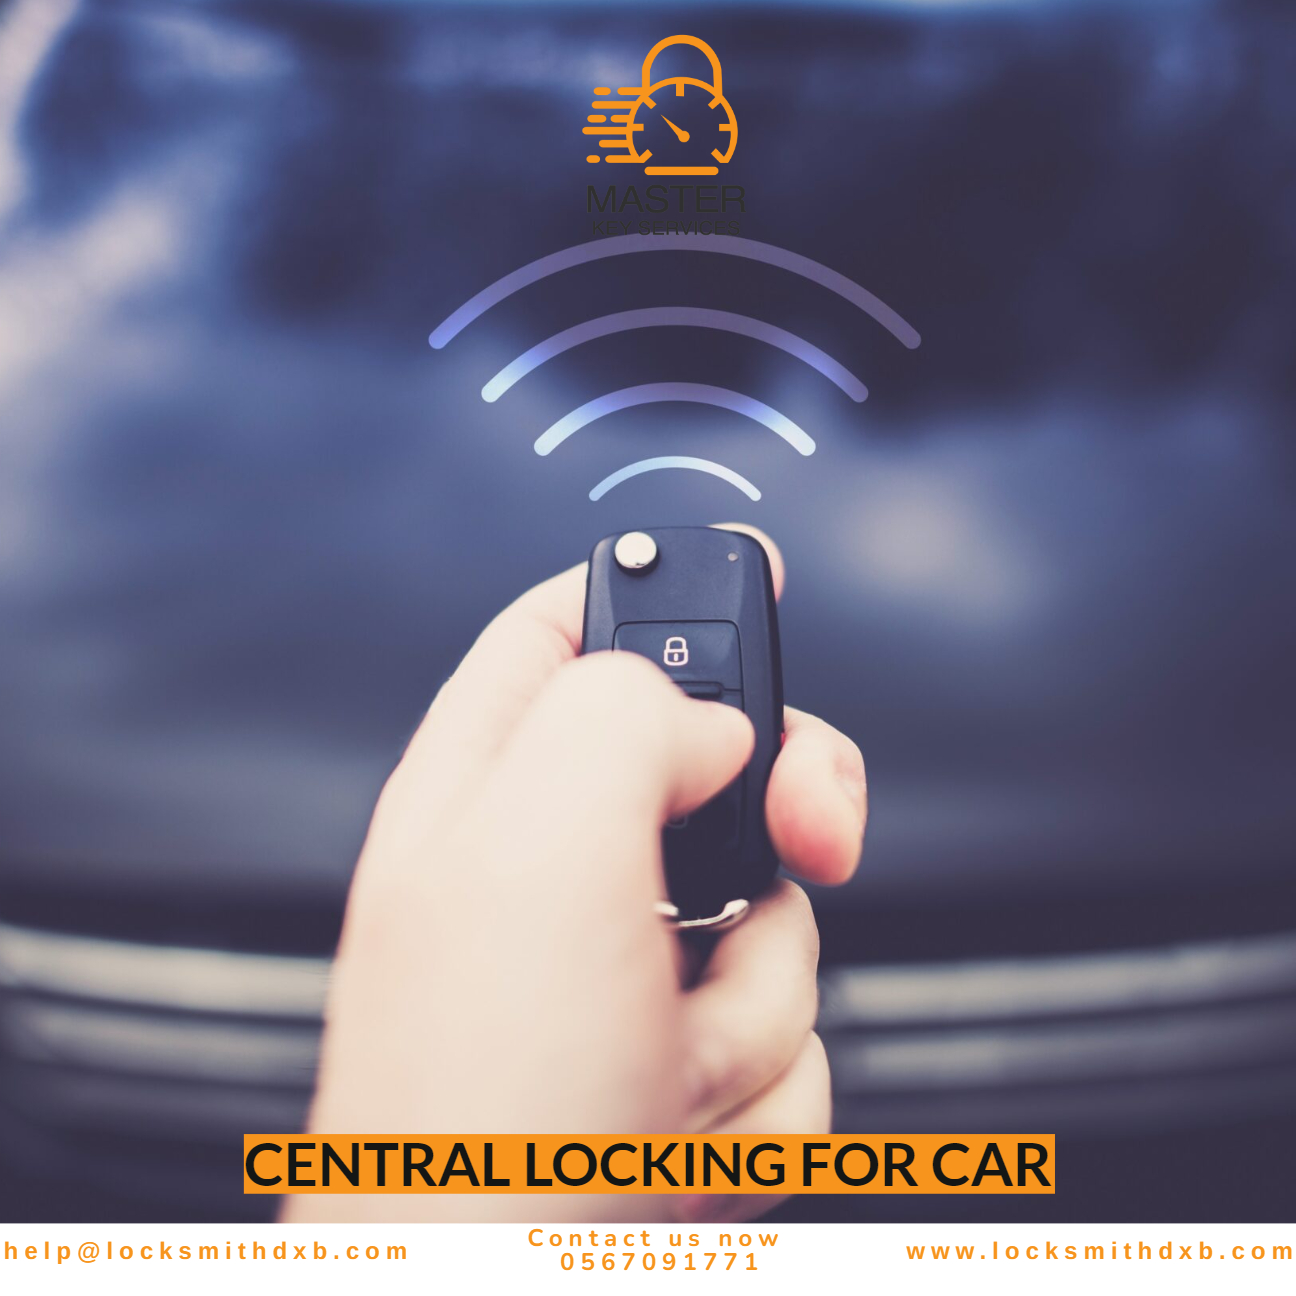 Central locking for car